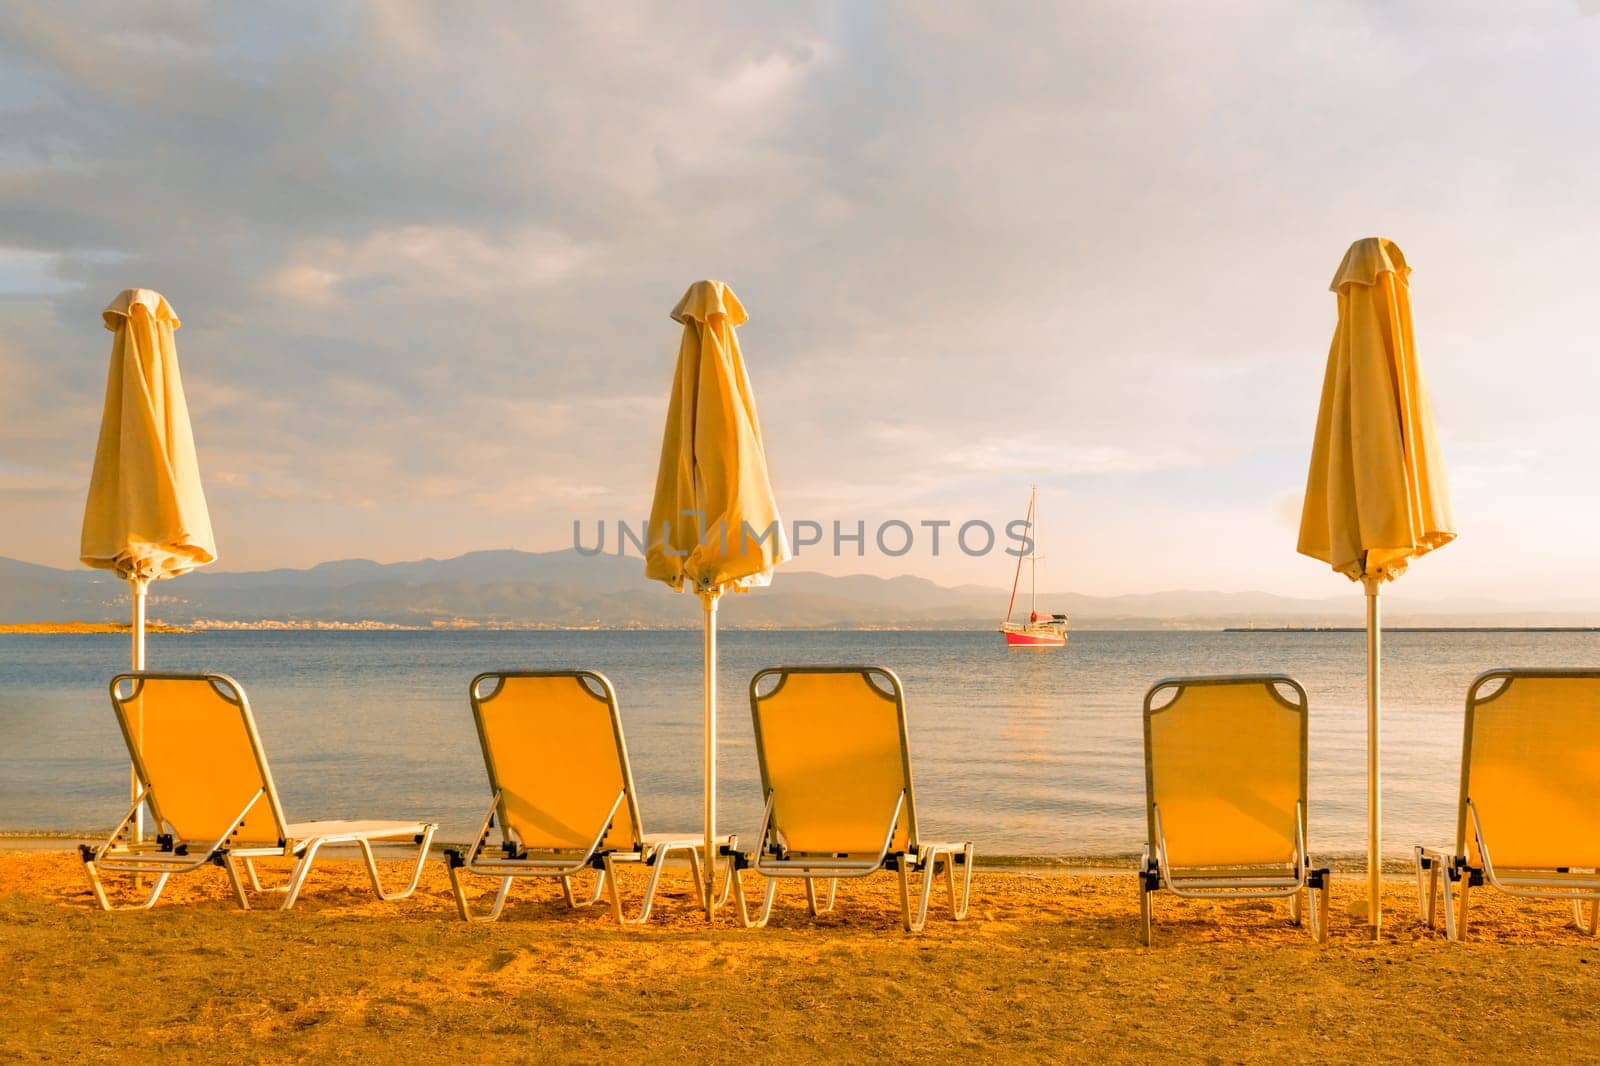 Empty beach chairs umbrella sun deck chairs beach lounge chair sea yacht beach sailboat sea shore sunset sail boat. Seashore background vacation sea travel sun parasol and chaise longue, chaise lounge by synel